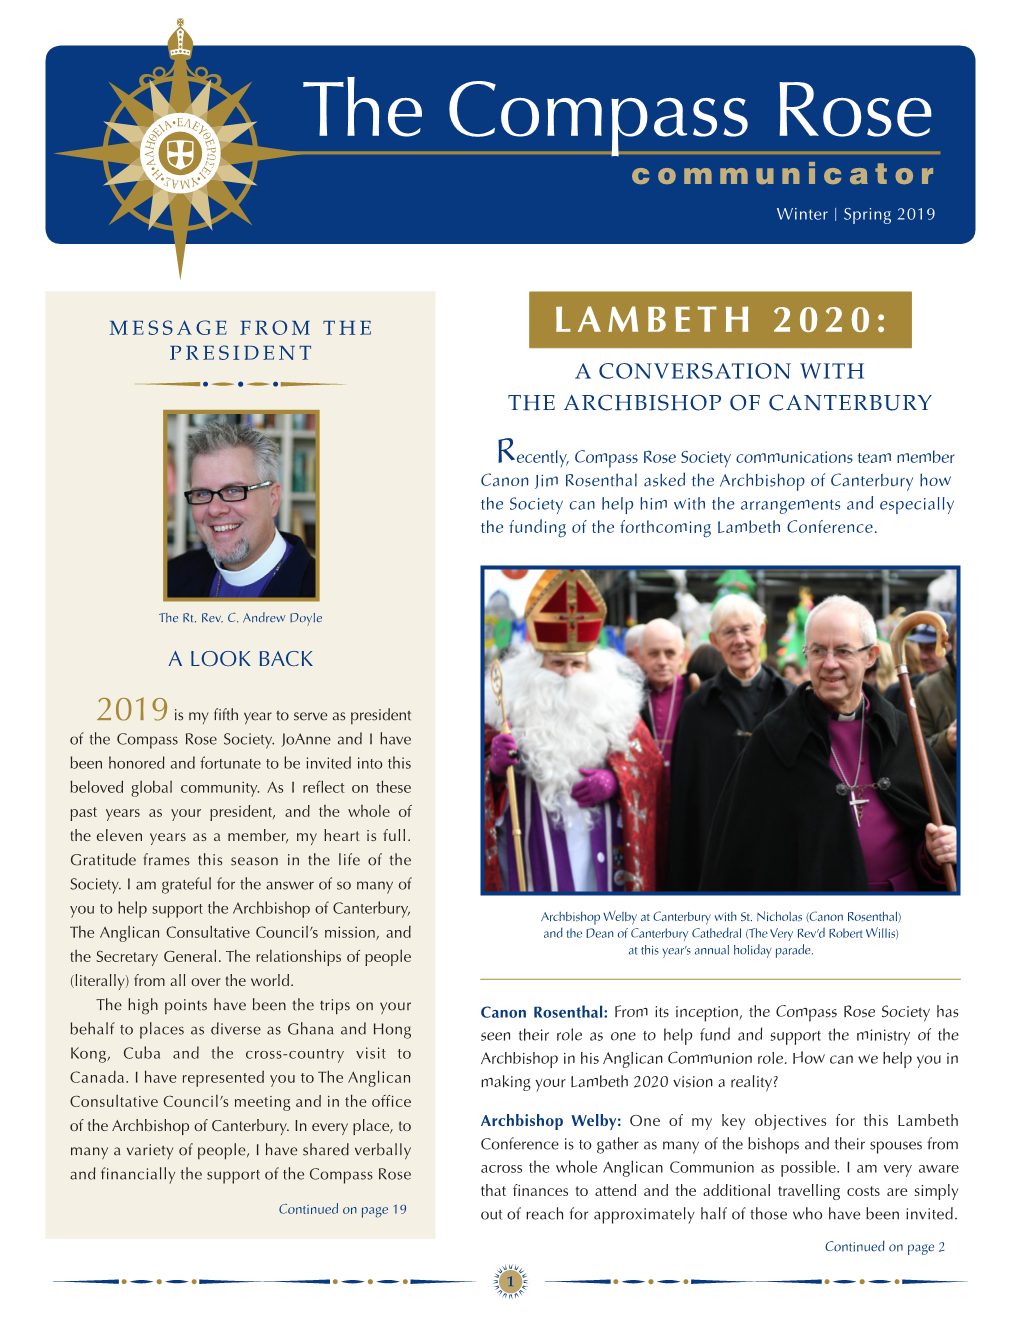 Lambeth 2020: President a Conversation with the Archbishop of Canterbury